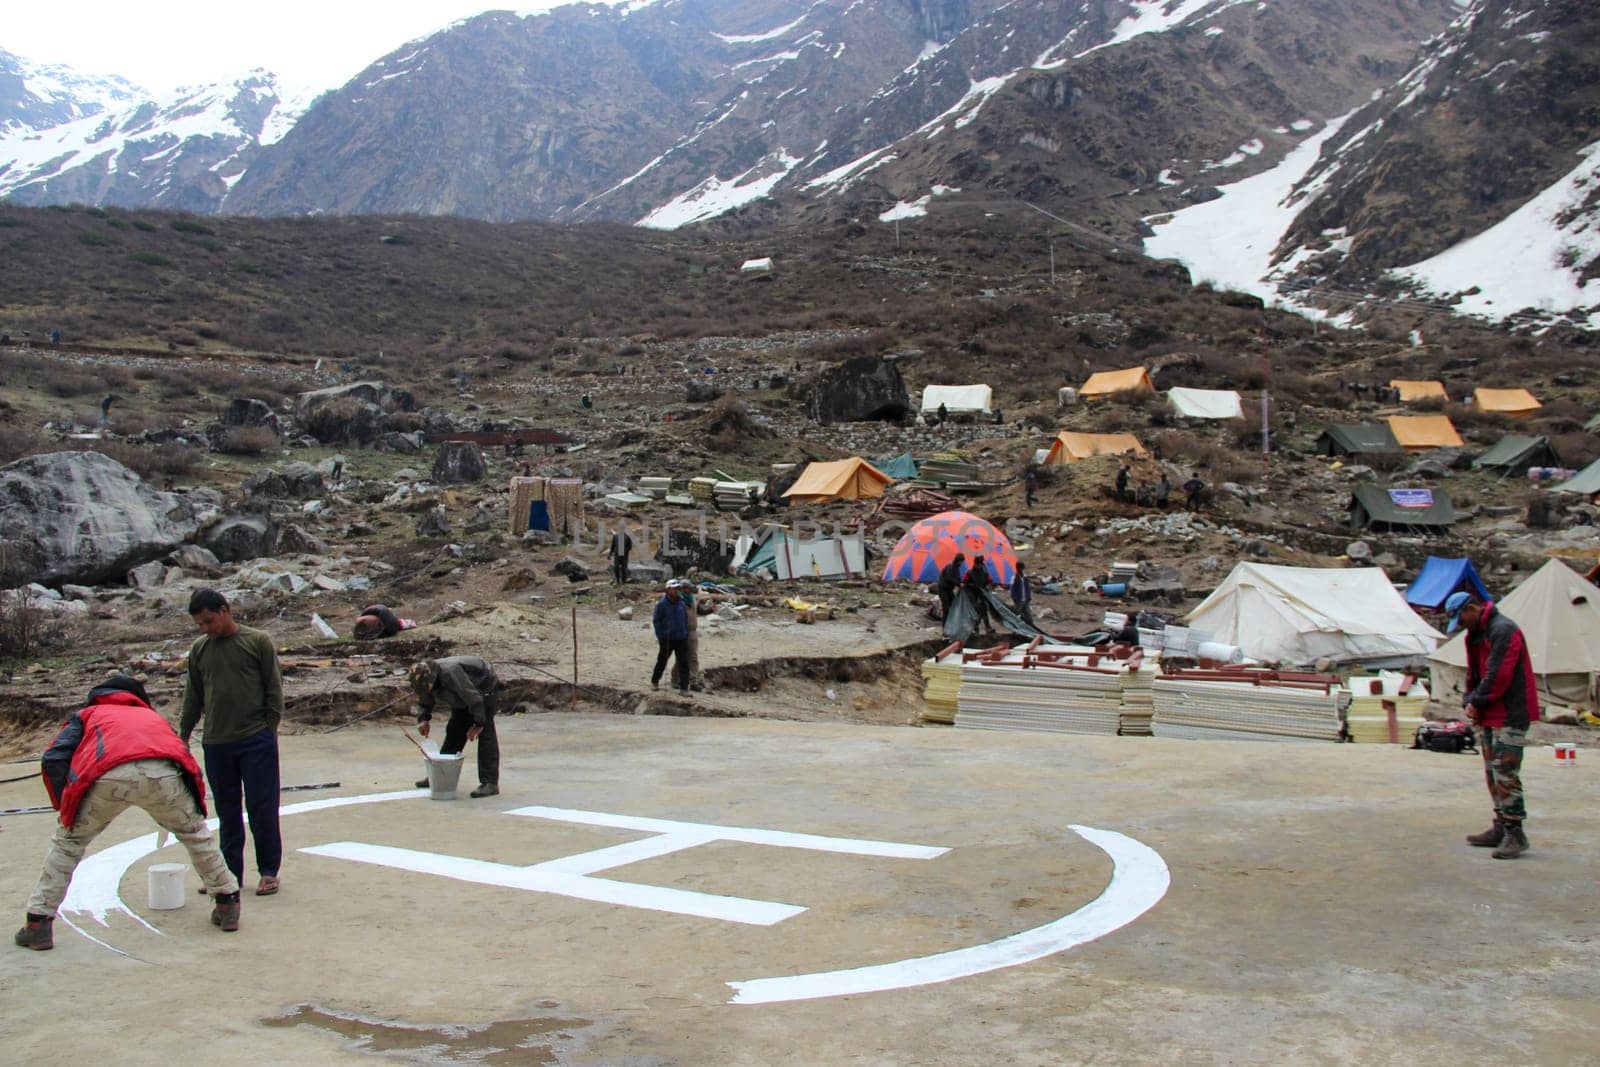 Helipad painting with H symbol in India. by stocksvids